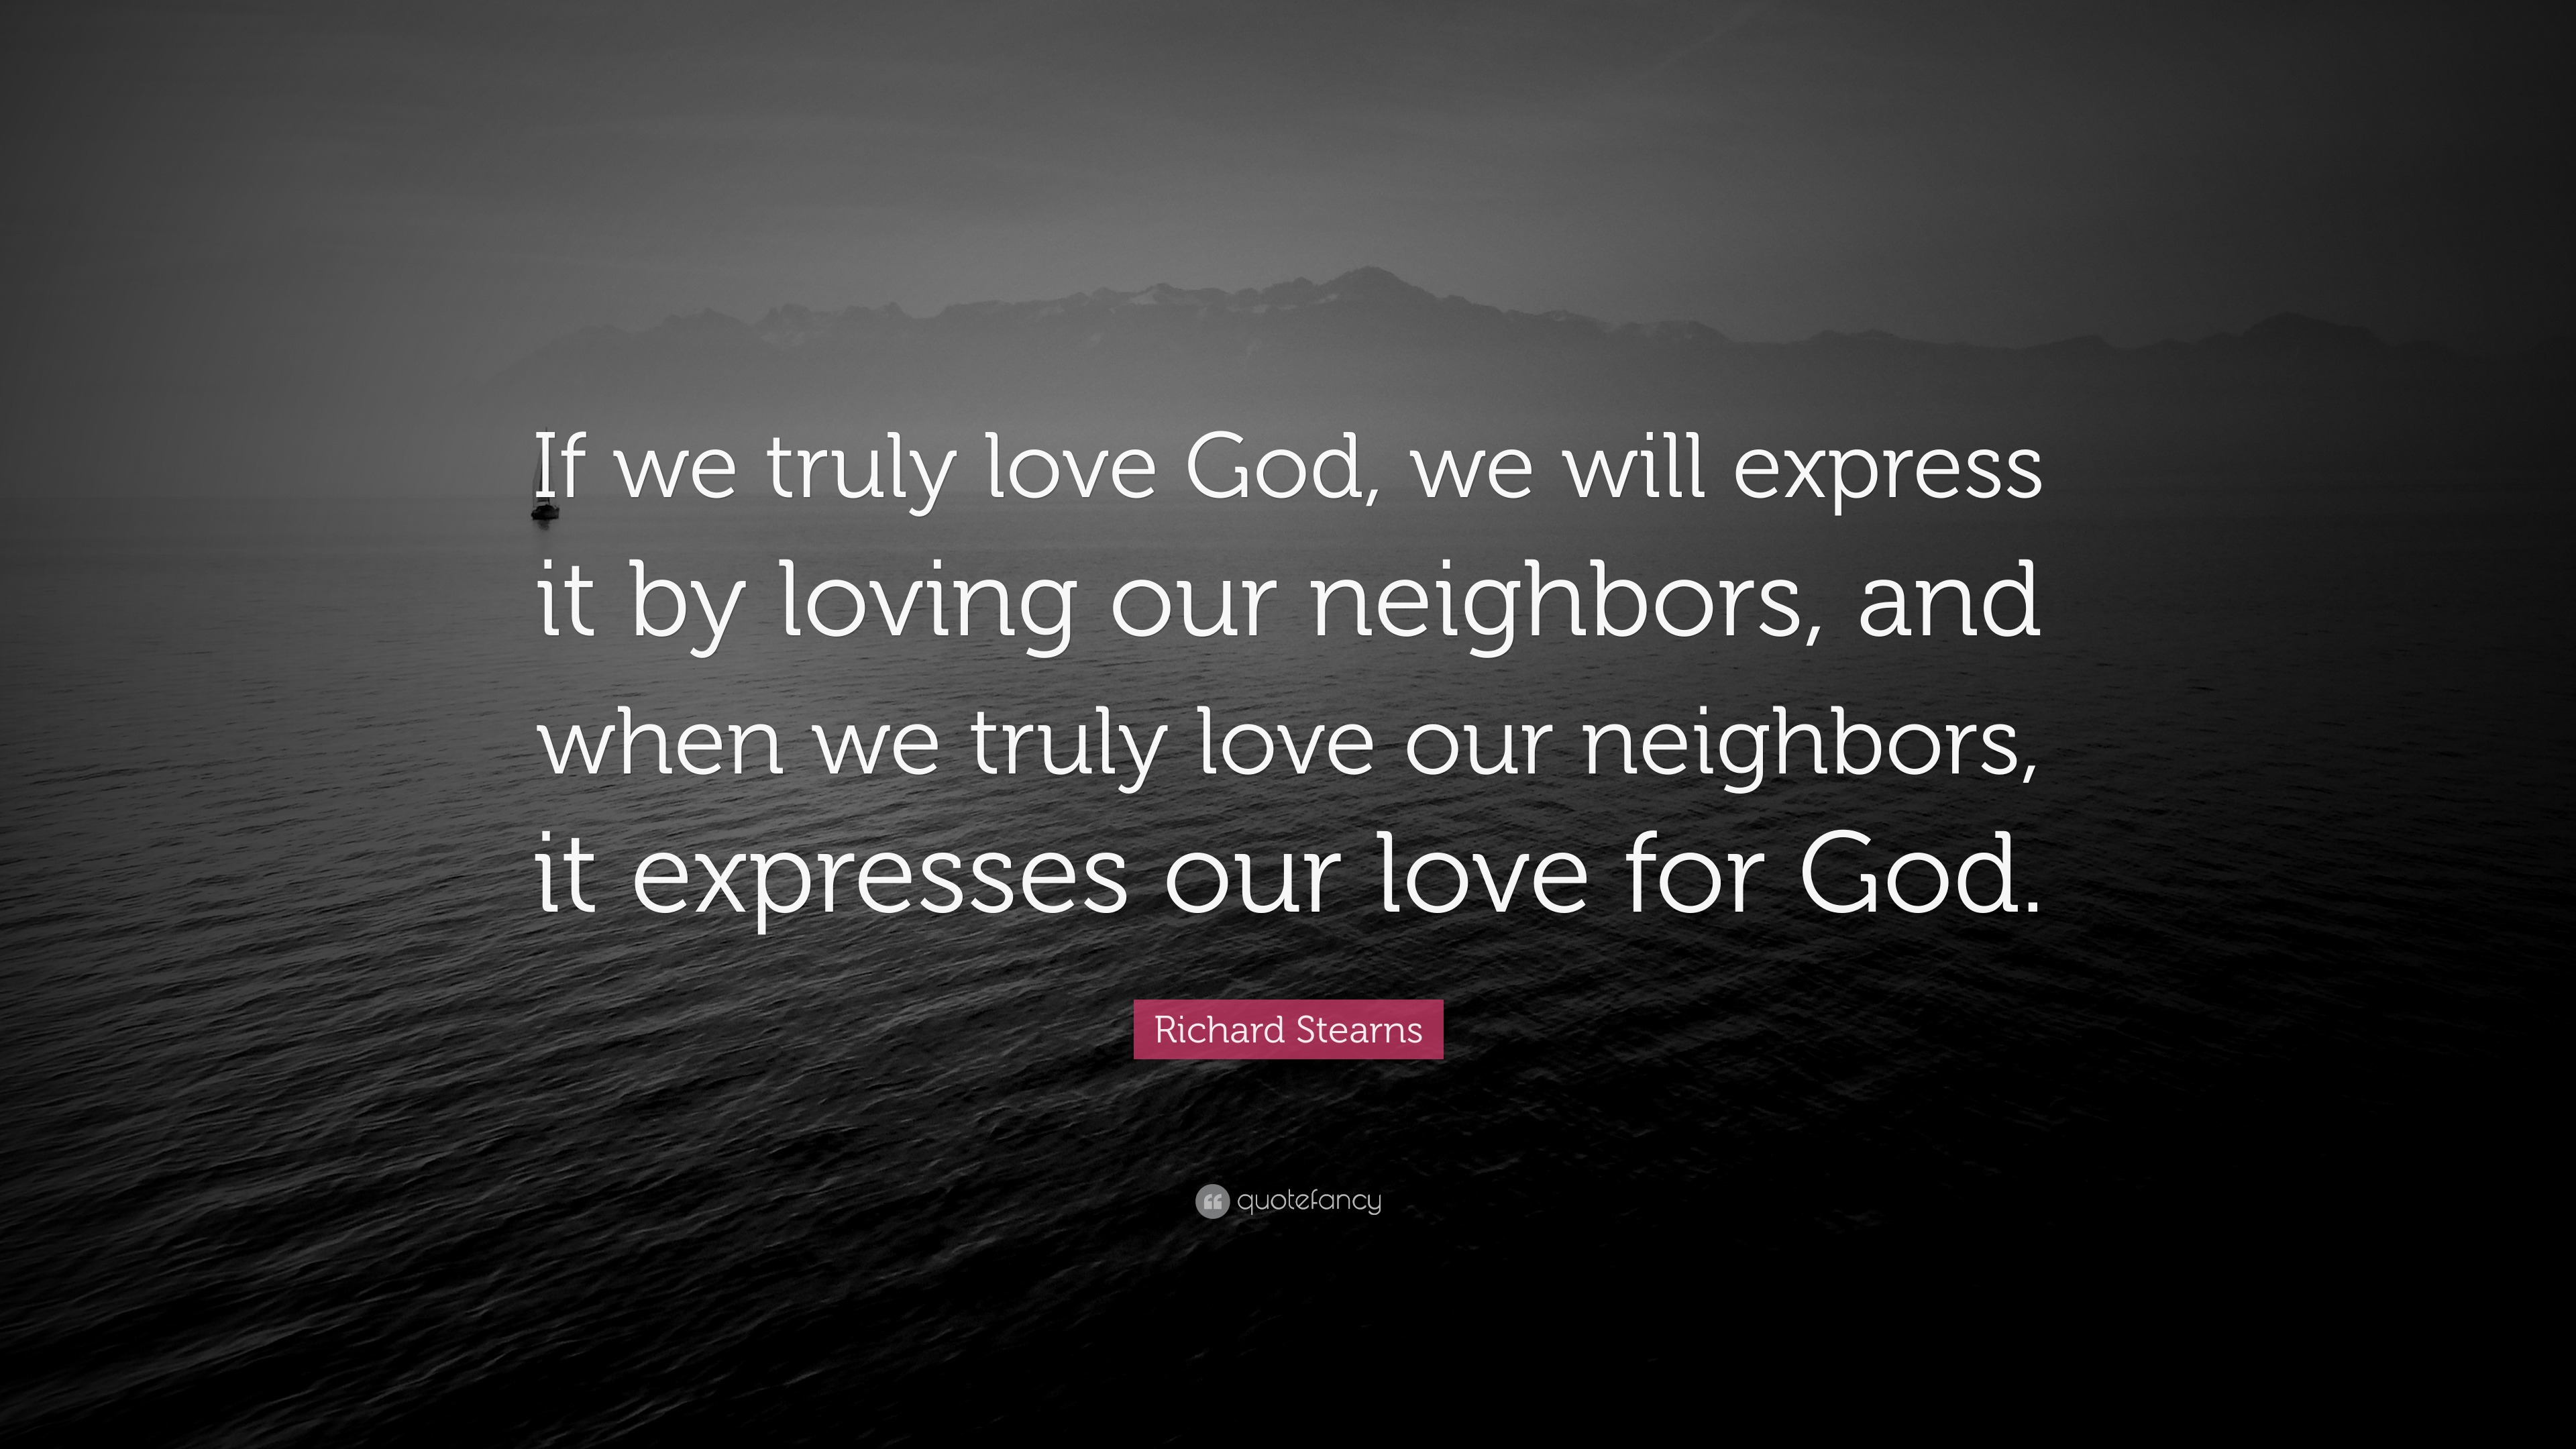 Richard Stearns Quote “If we truly love God, we will